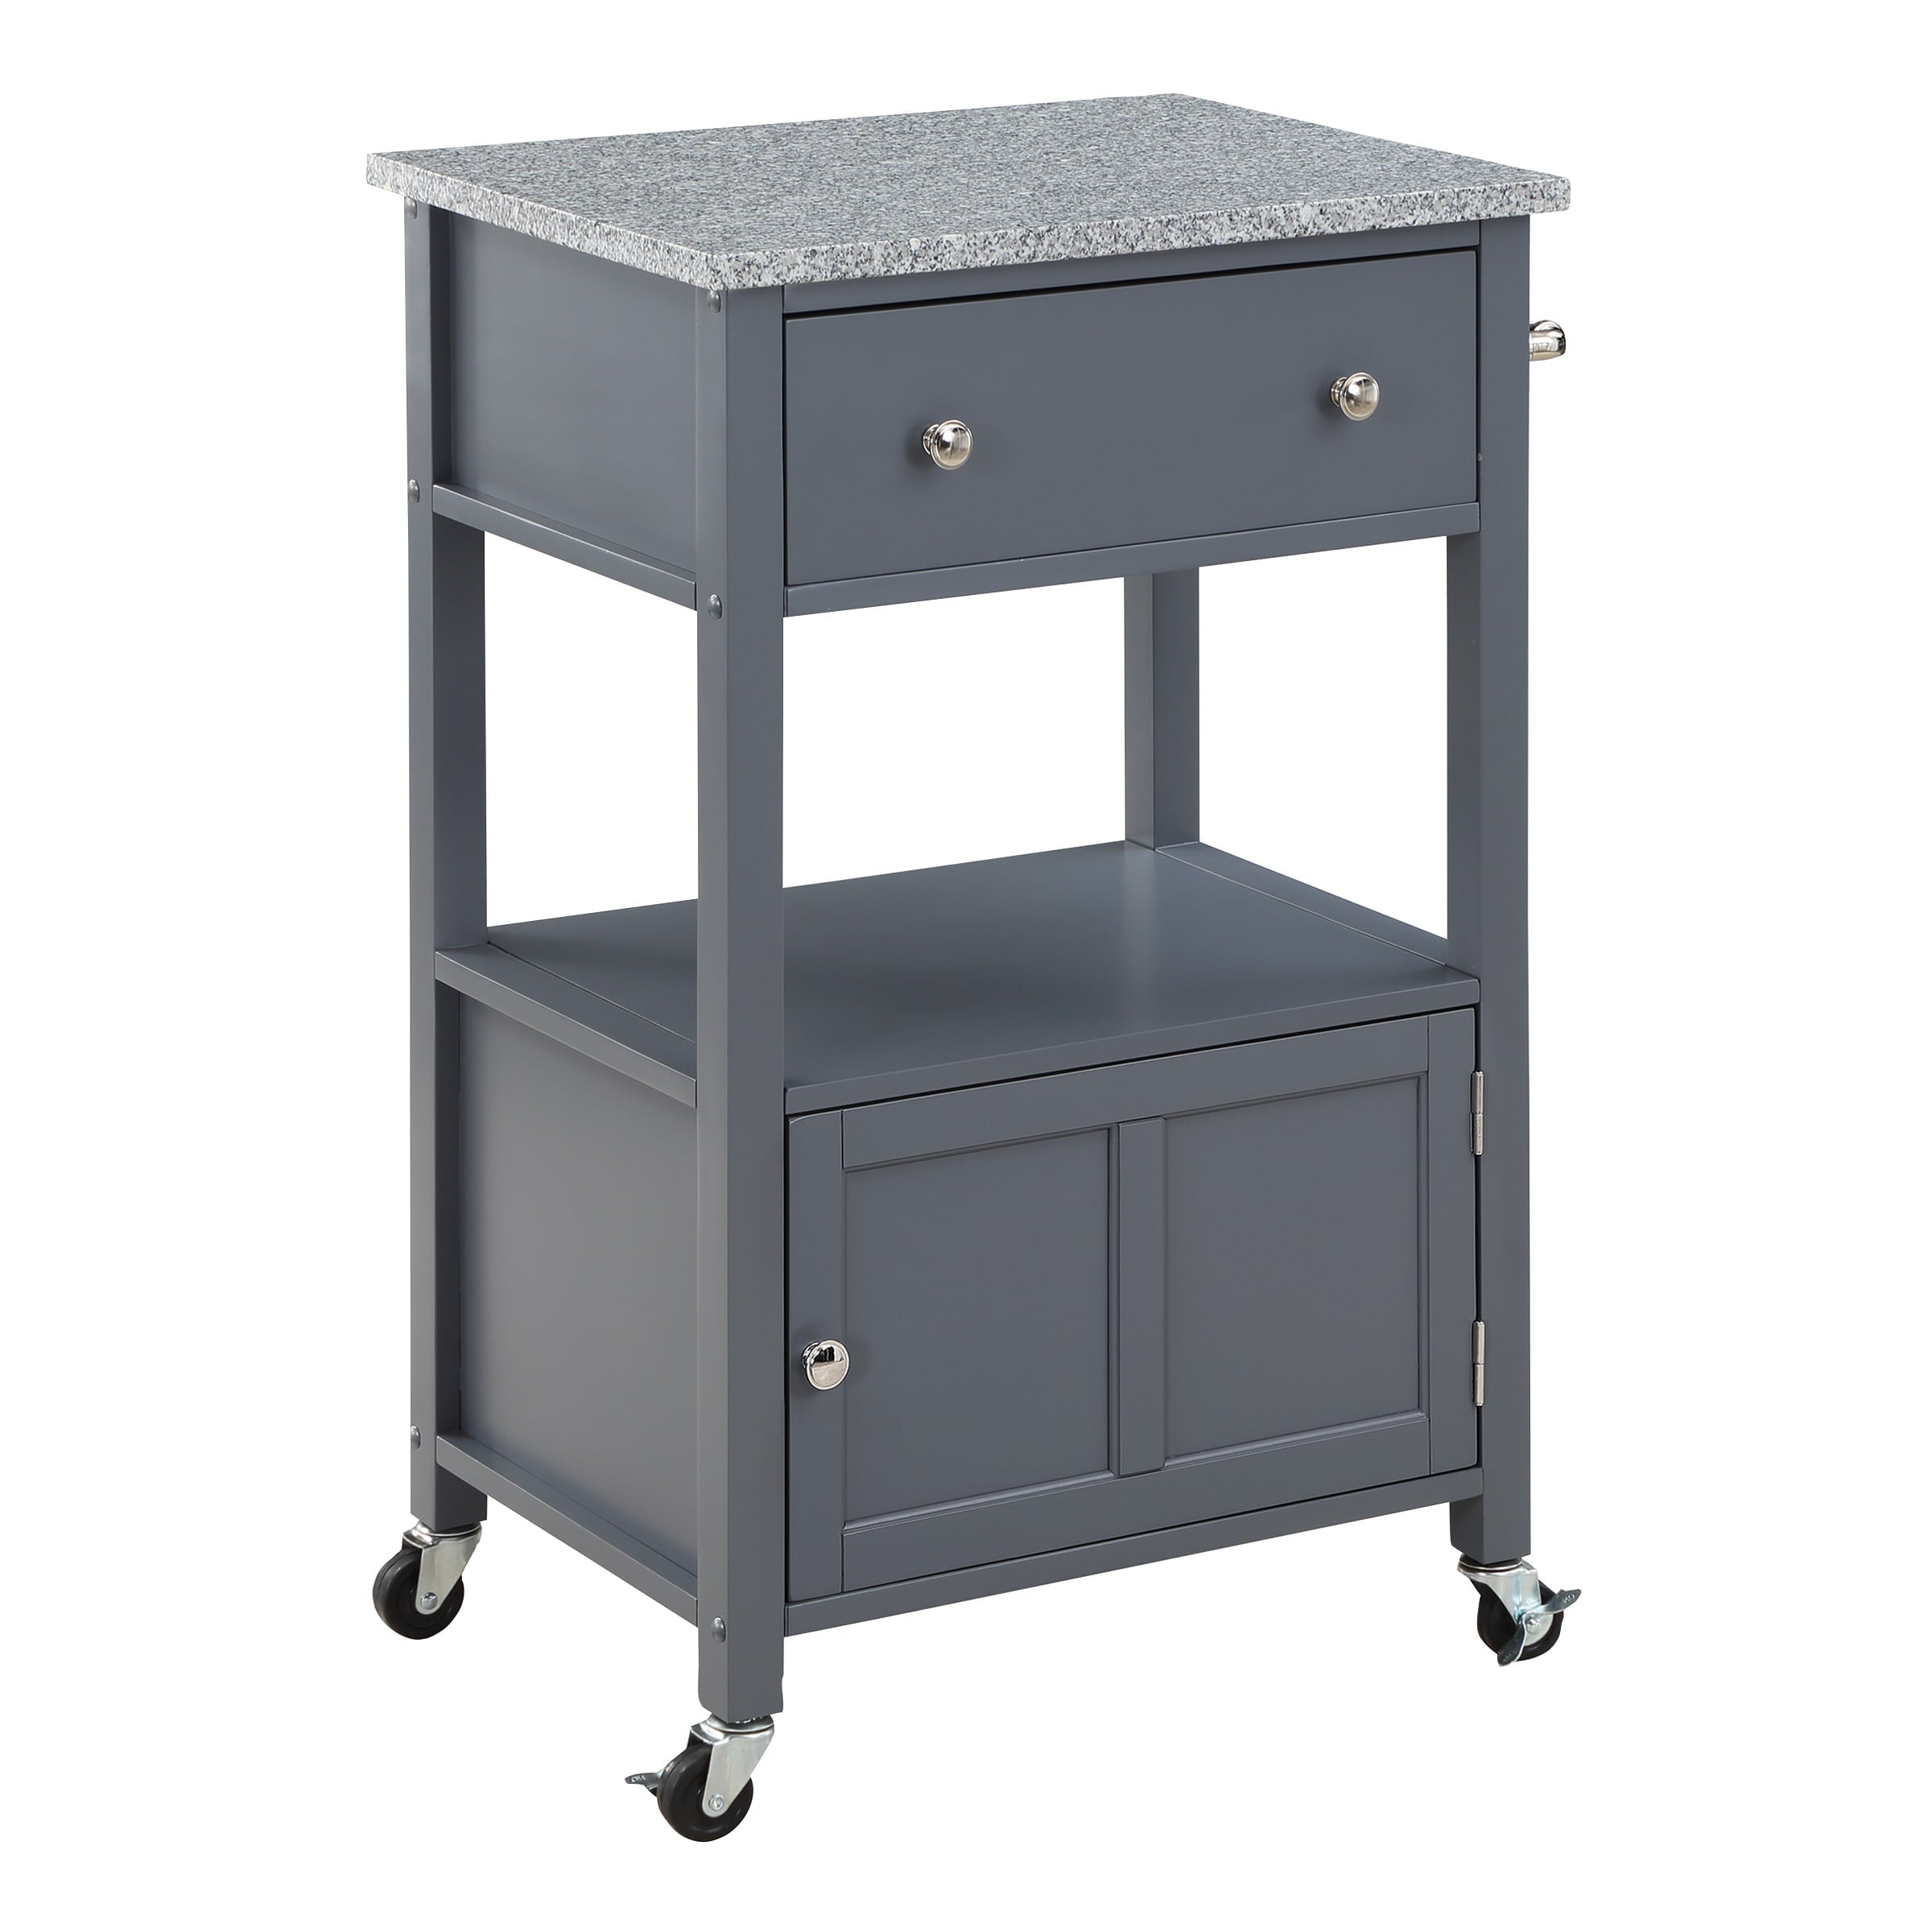 OS Home and Office Furniture Fairfax Model FRXG-2 Gray Kitchen Cart with Doors， Towel Rack， and Drawer